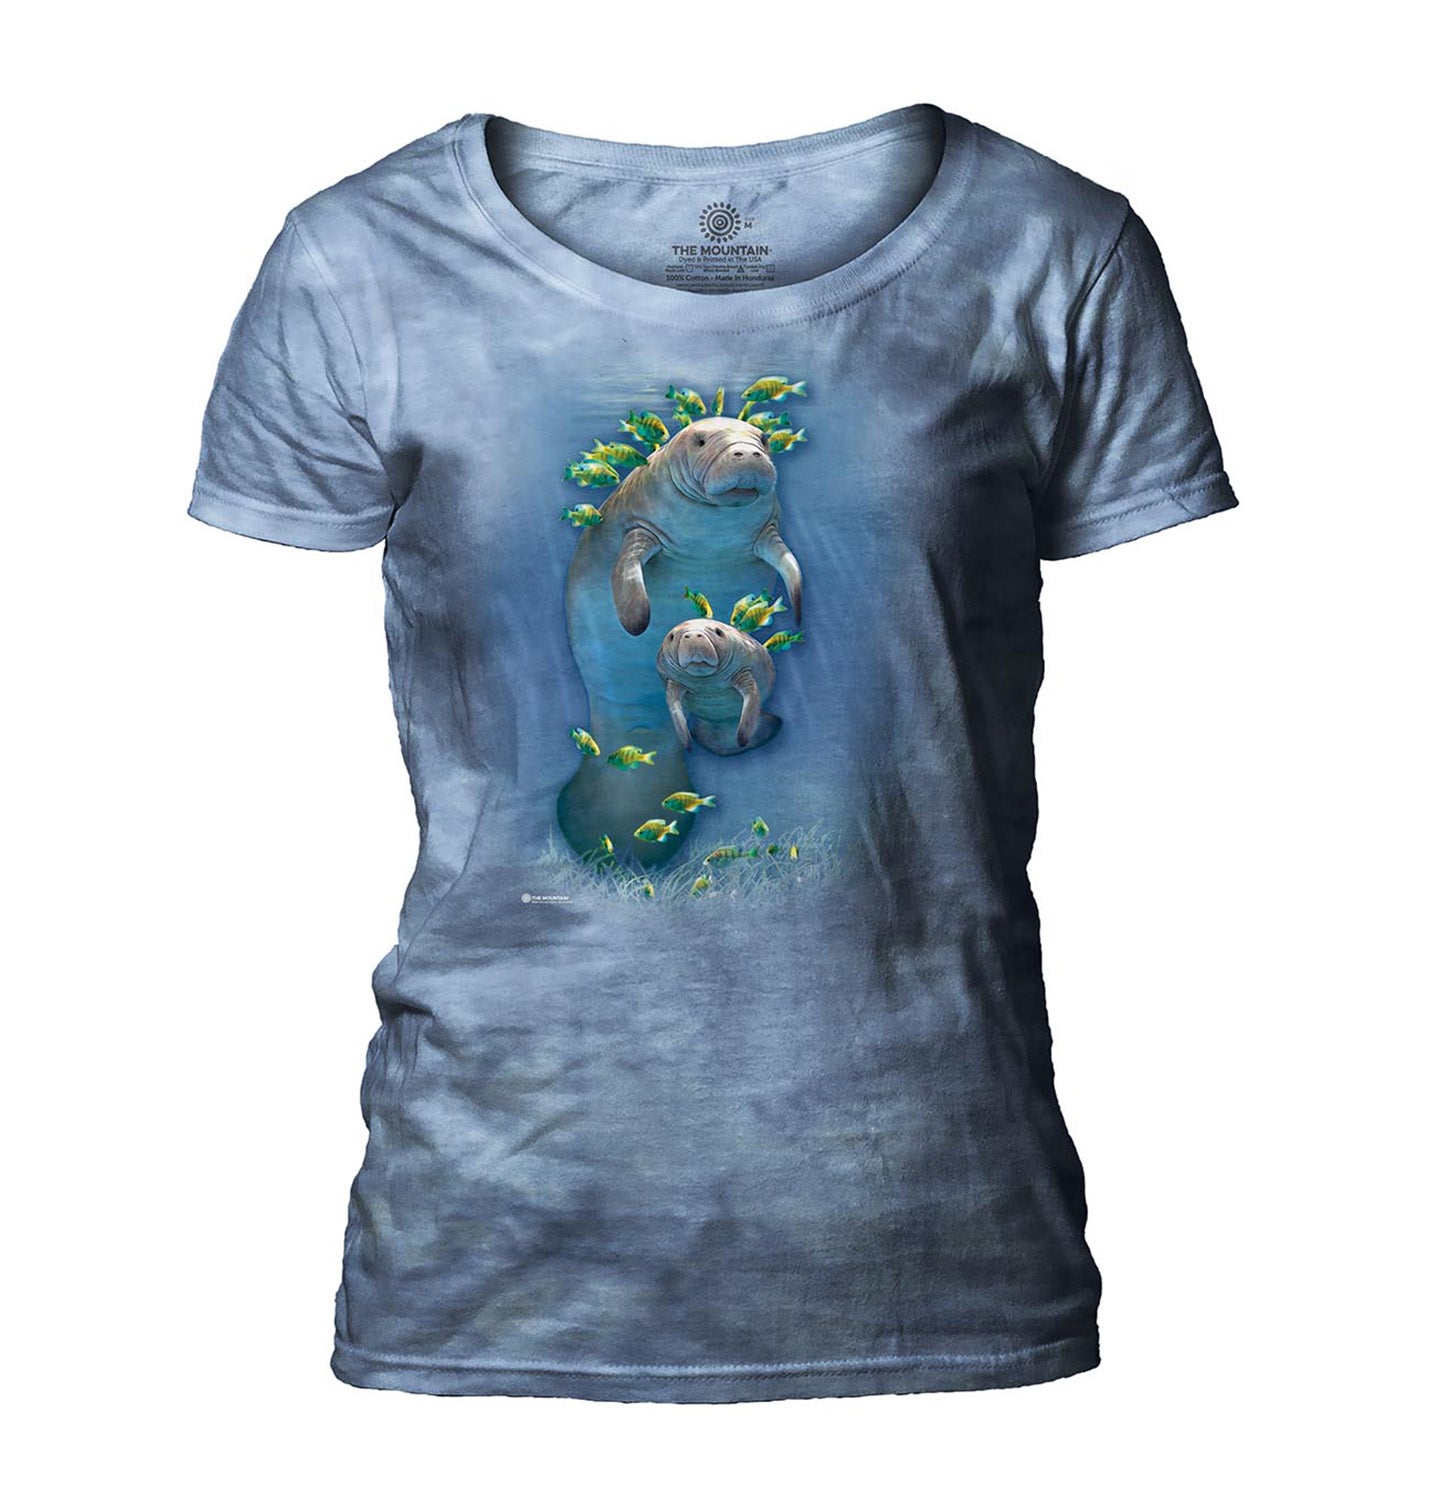 The Mountain - Sea Cow and Calf - Women's Scoop Neck T-Shirt